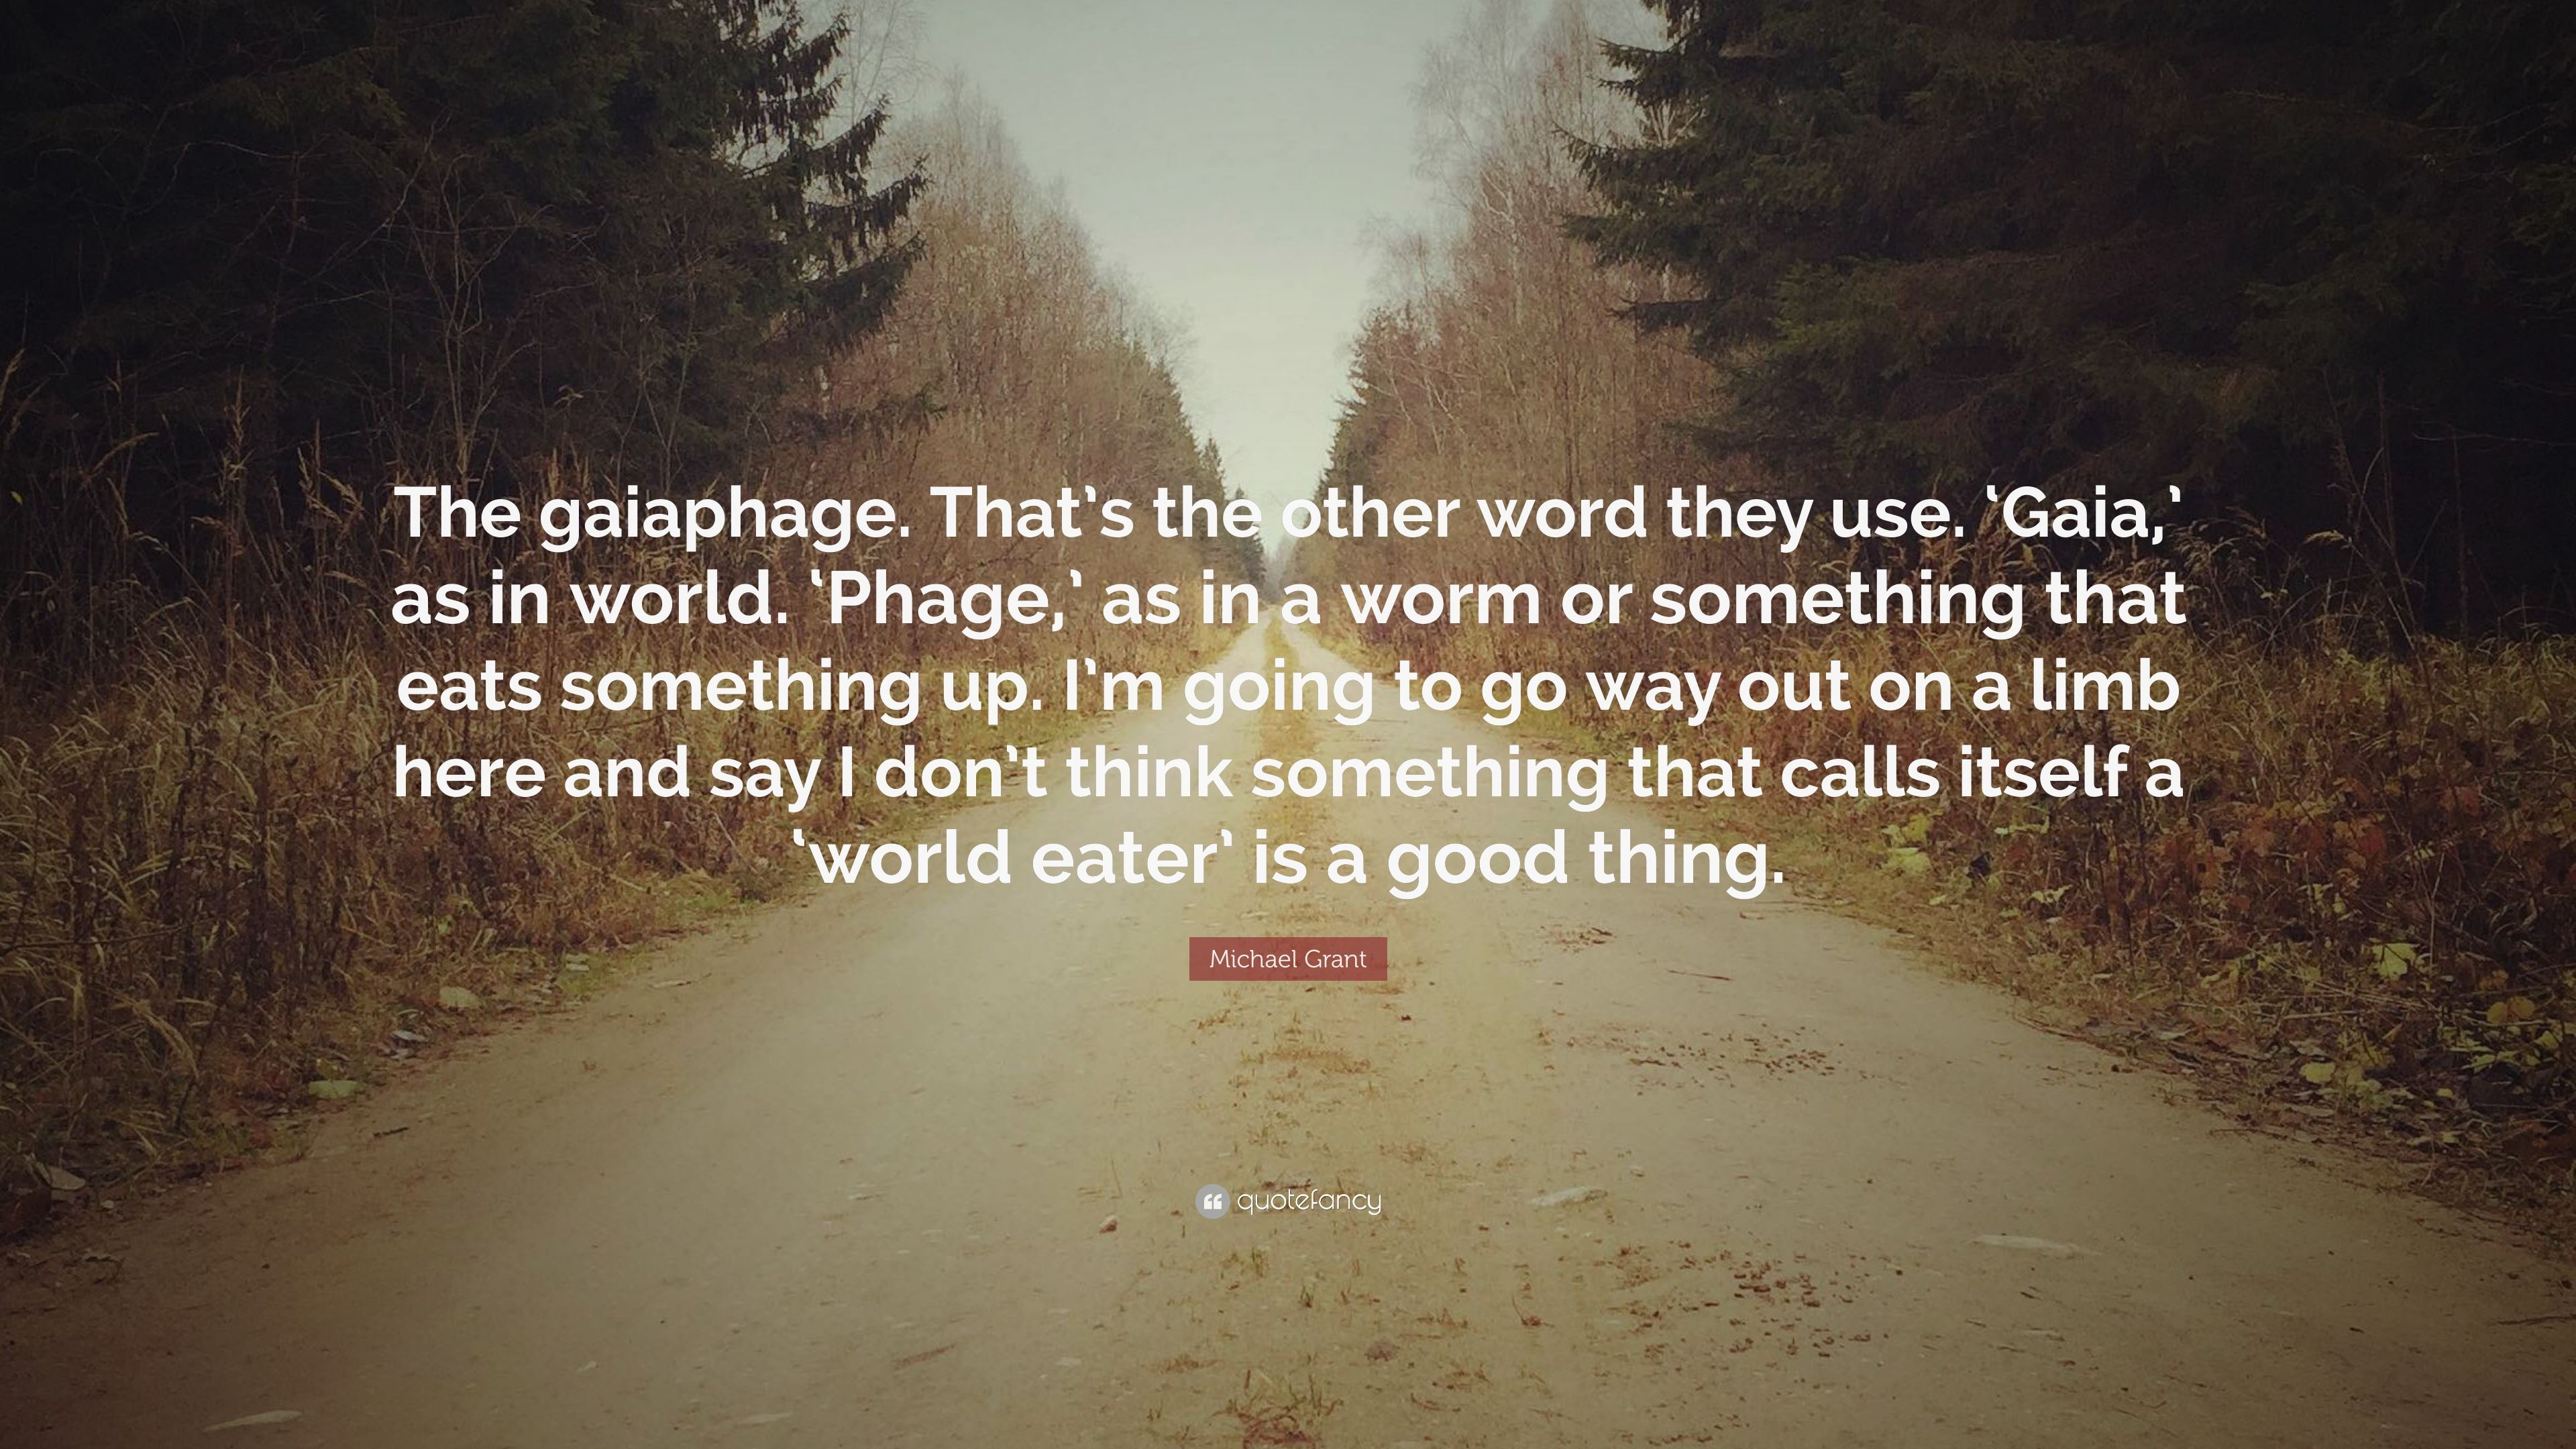 Michael Grant Quote: “The gaiaphage. That's the other word they use. 'Gaia, ' as in world. 'Phage, ' as in a worm or something that eats somethi.” (6 wallpaper)